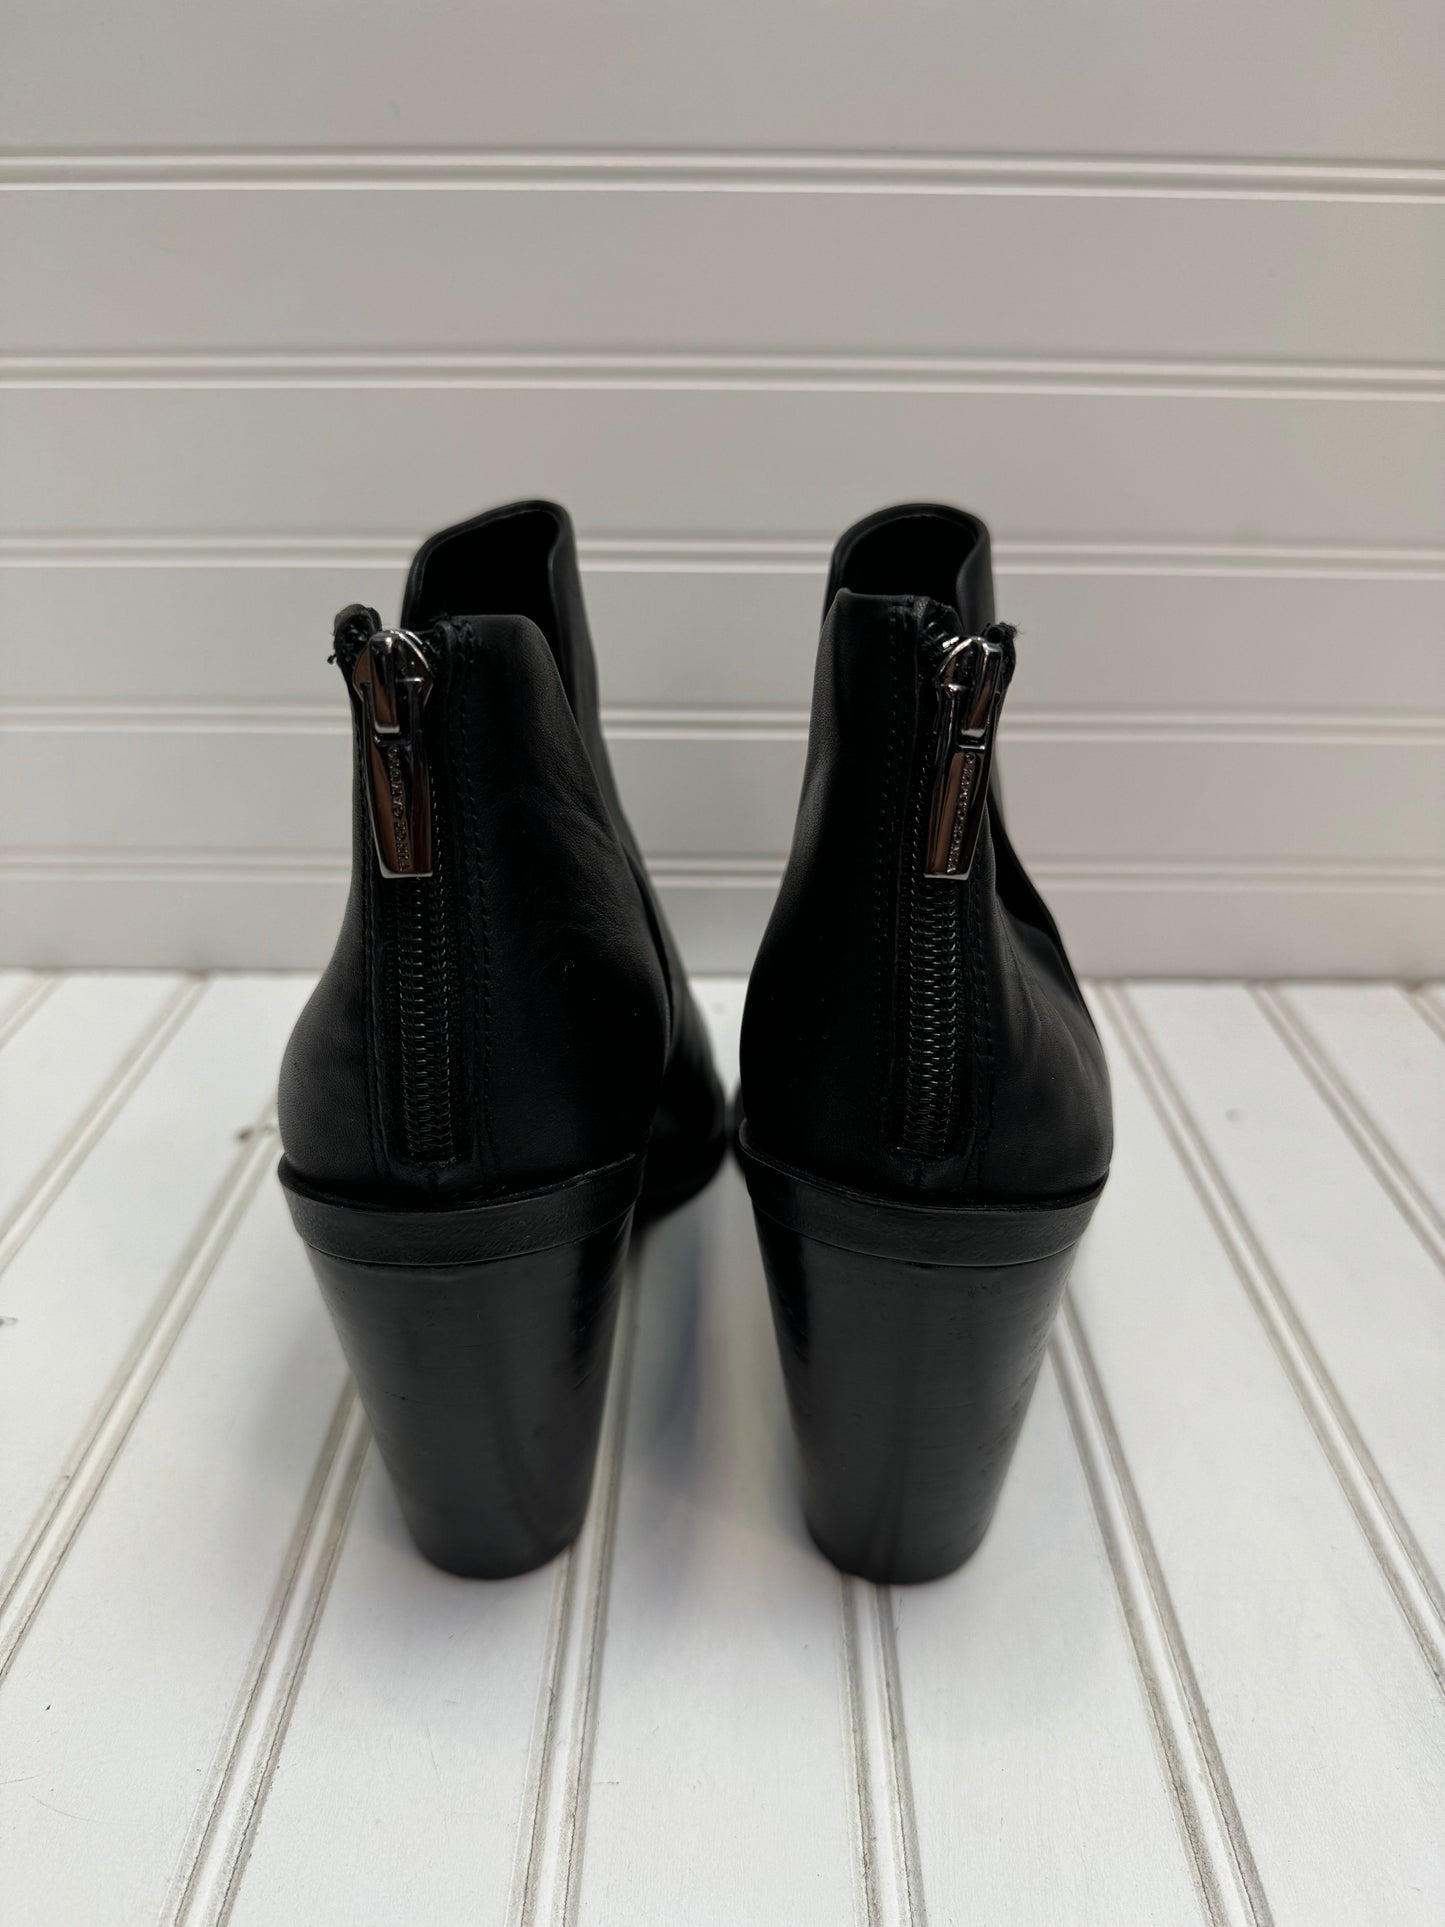 Black Boots Ankle Heels Vince Camuto, Size 8.5